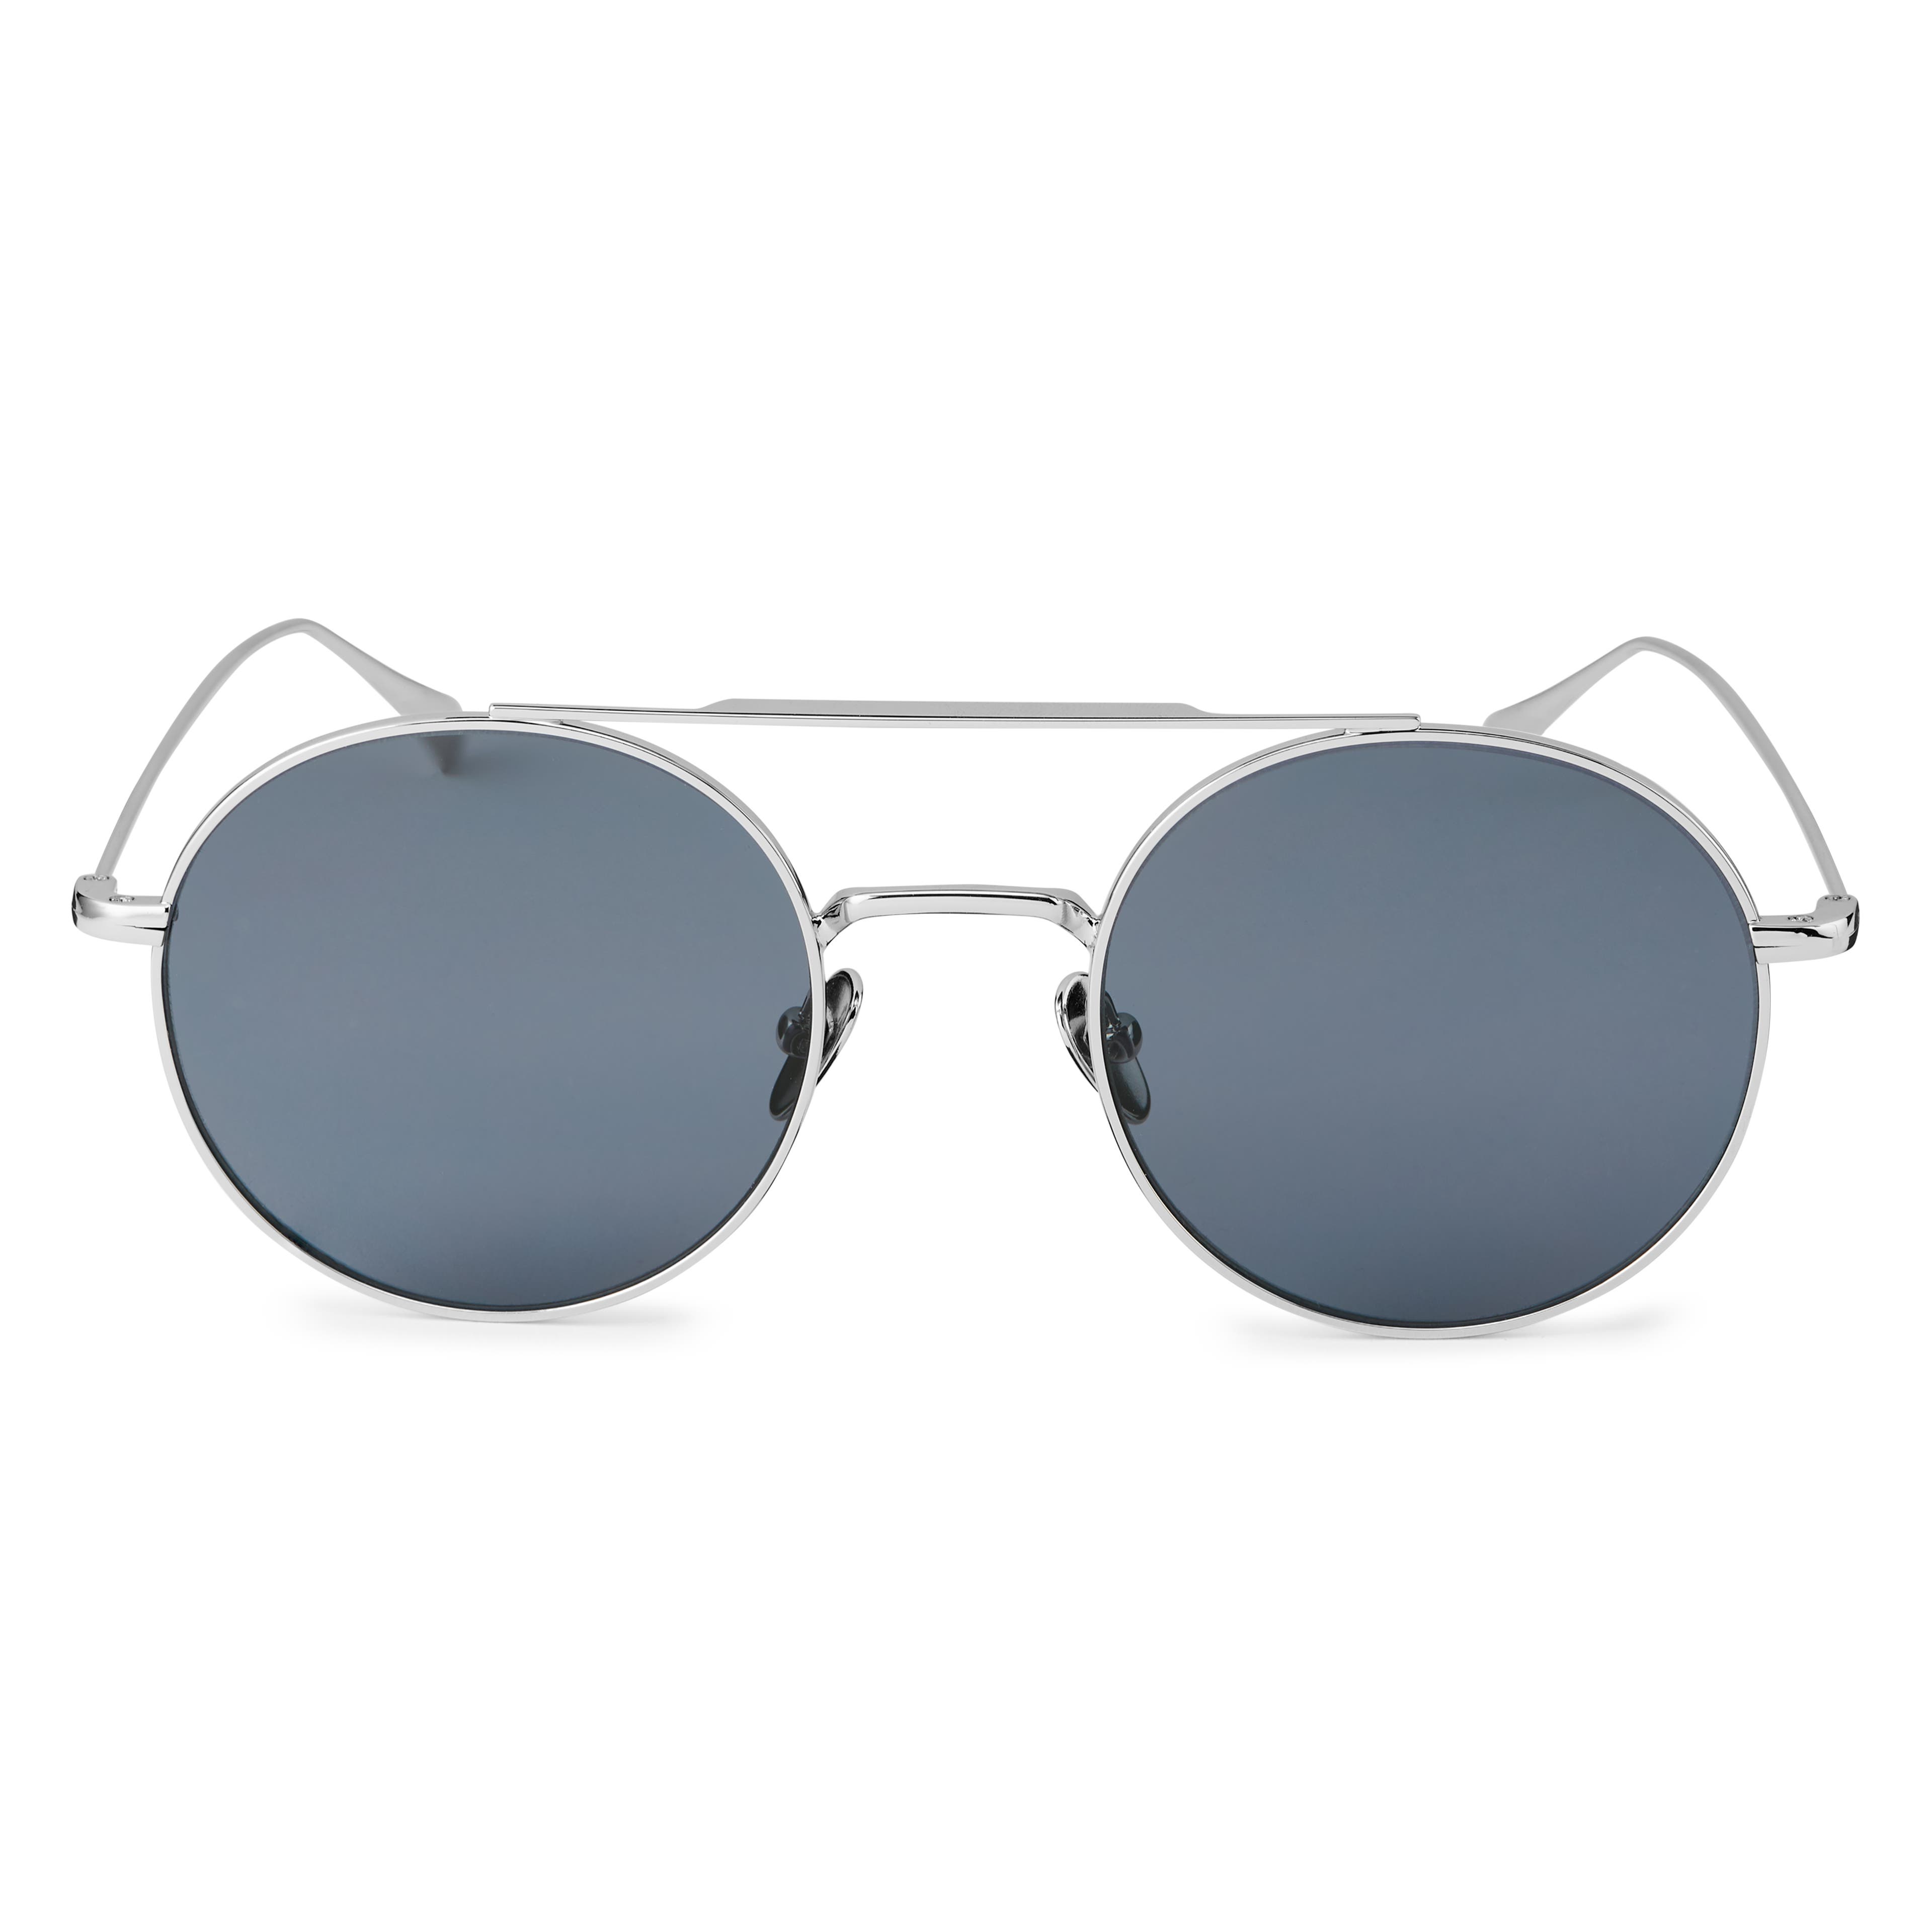 Thea | Silver-Tone & Smoke Grey Stainless Steel Round Sunglasses